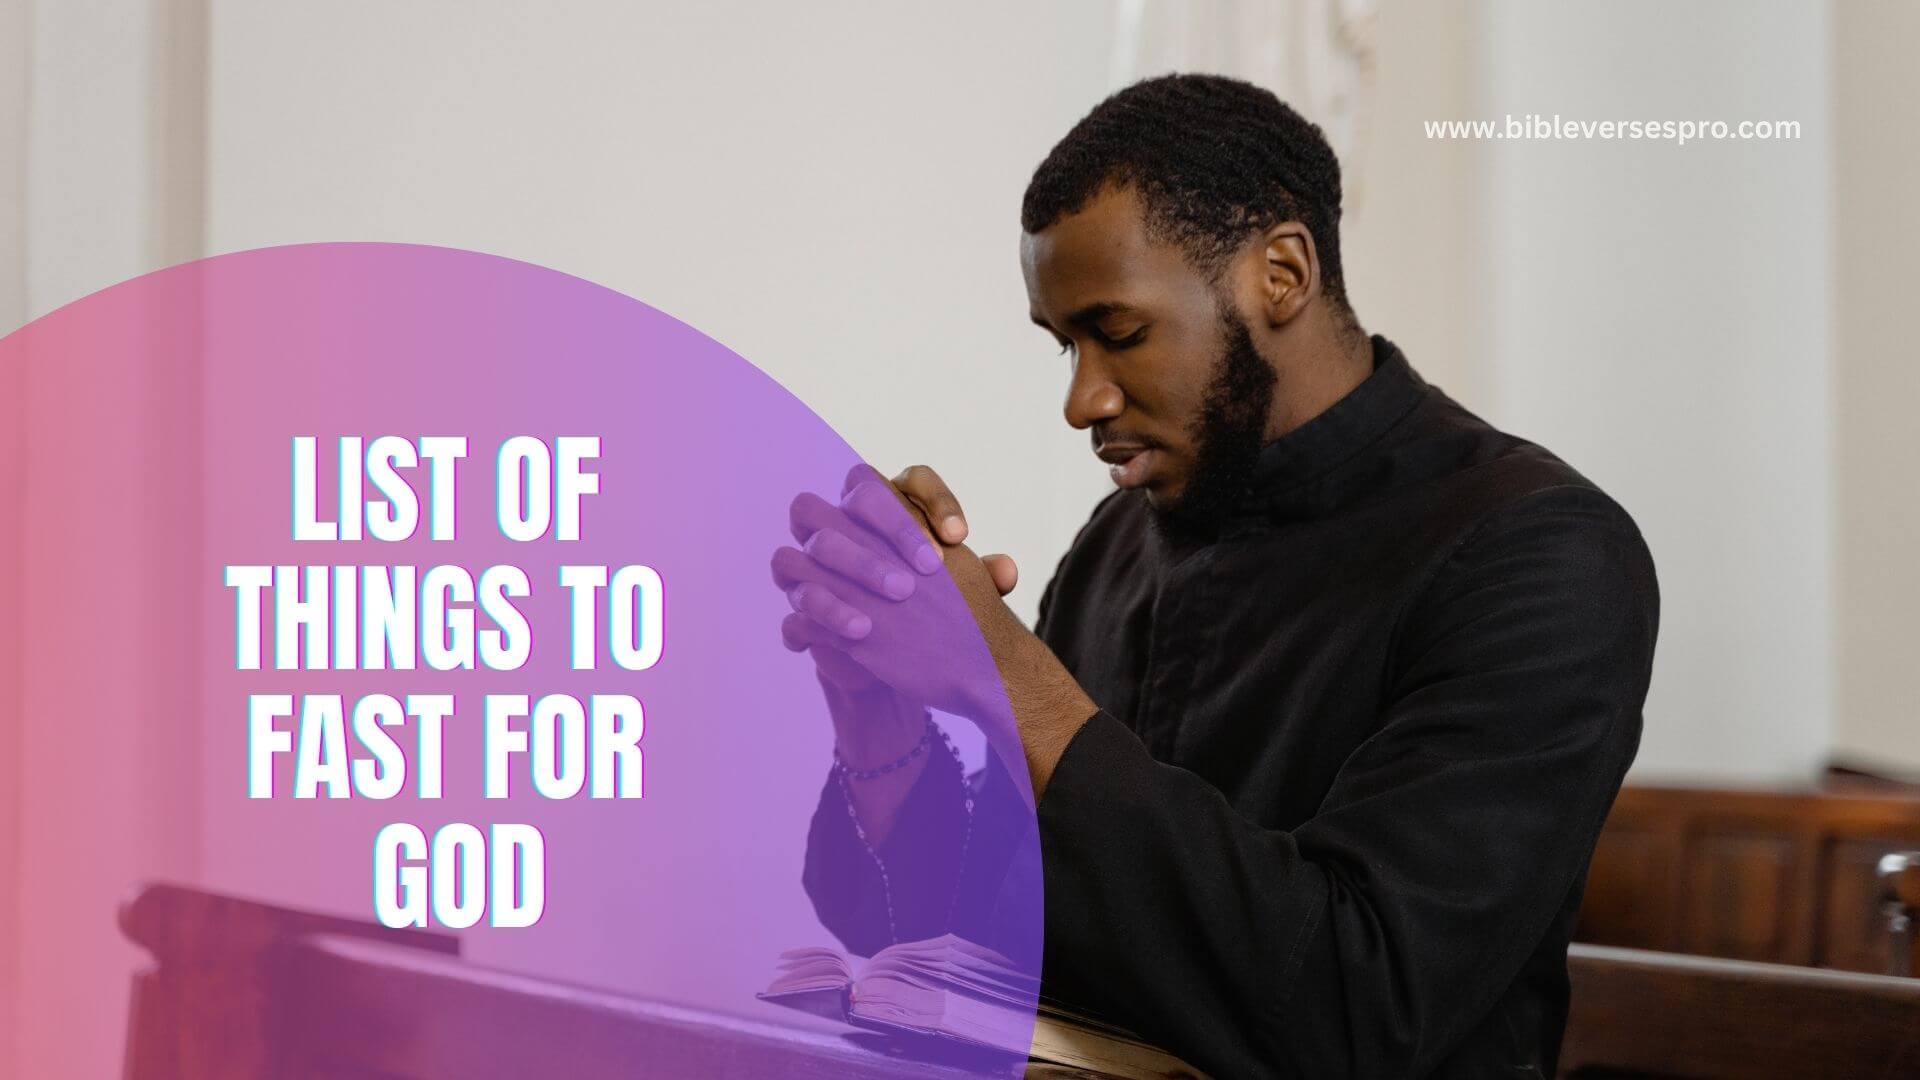 LIST OF THINGS TO FAST FOR GOD (1)